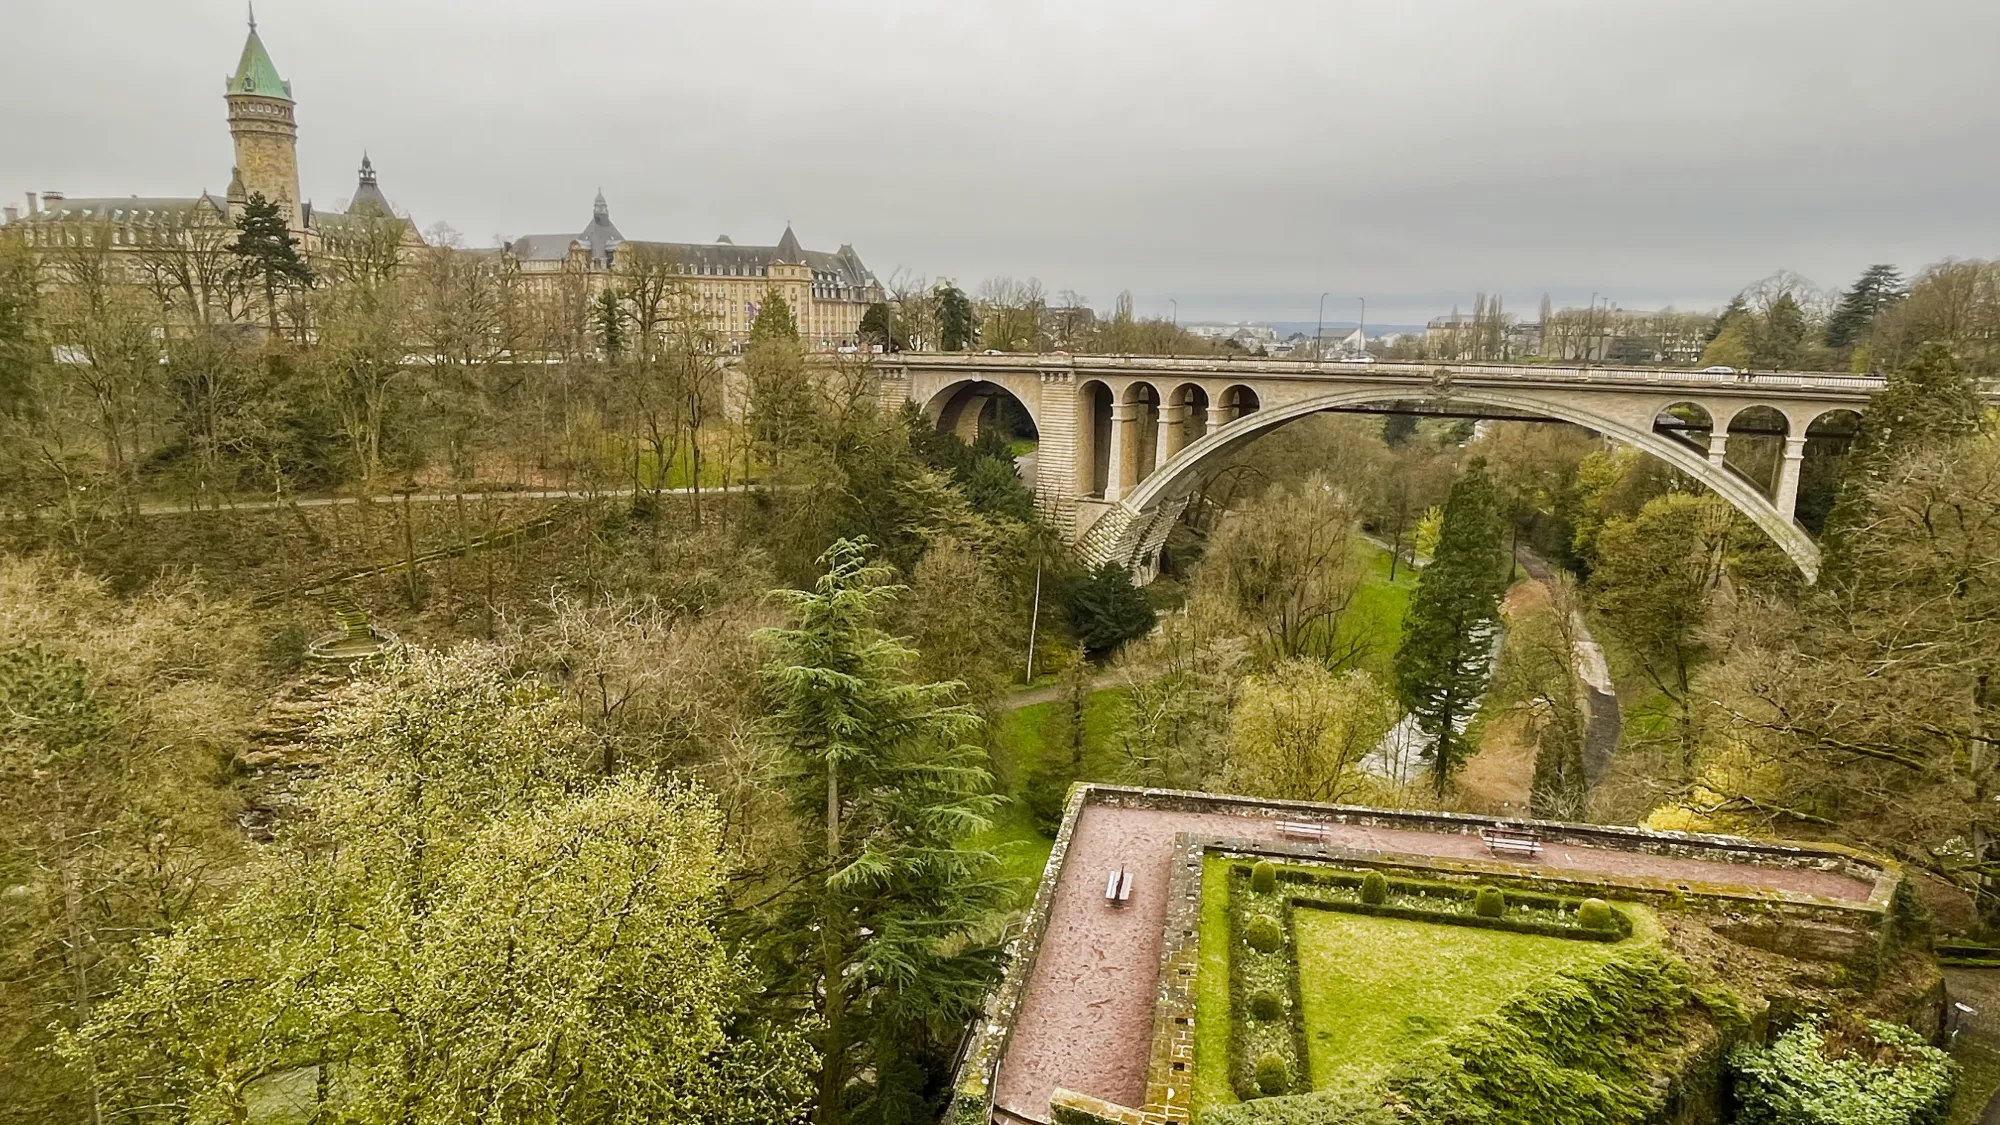 Overview of the bridge and green space in Luxembourg City